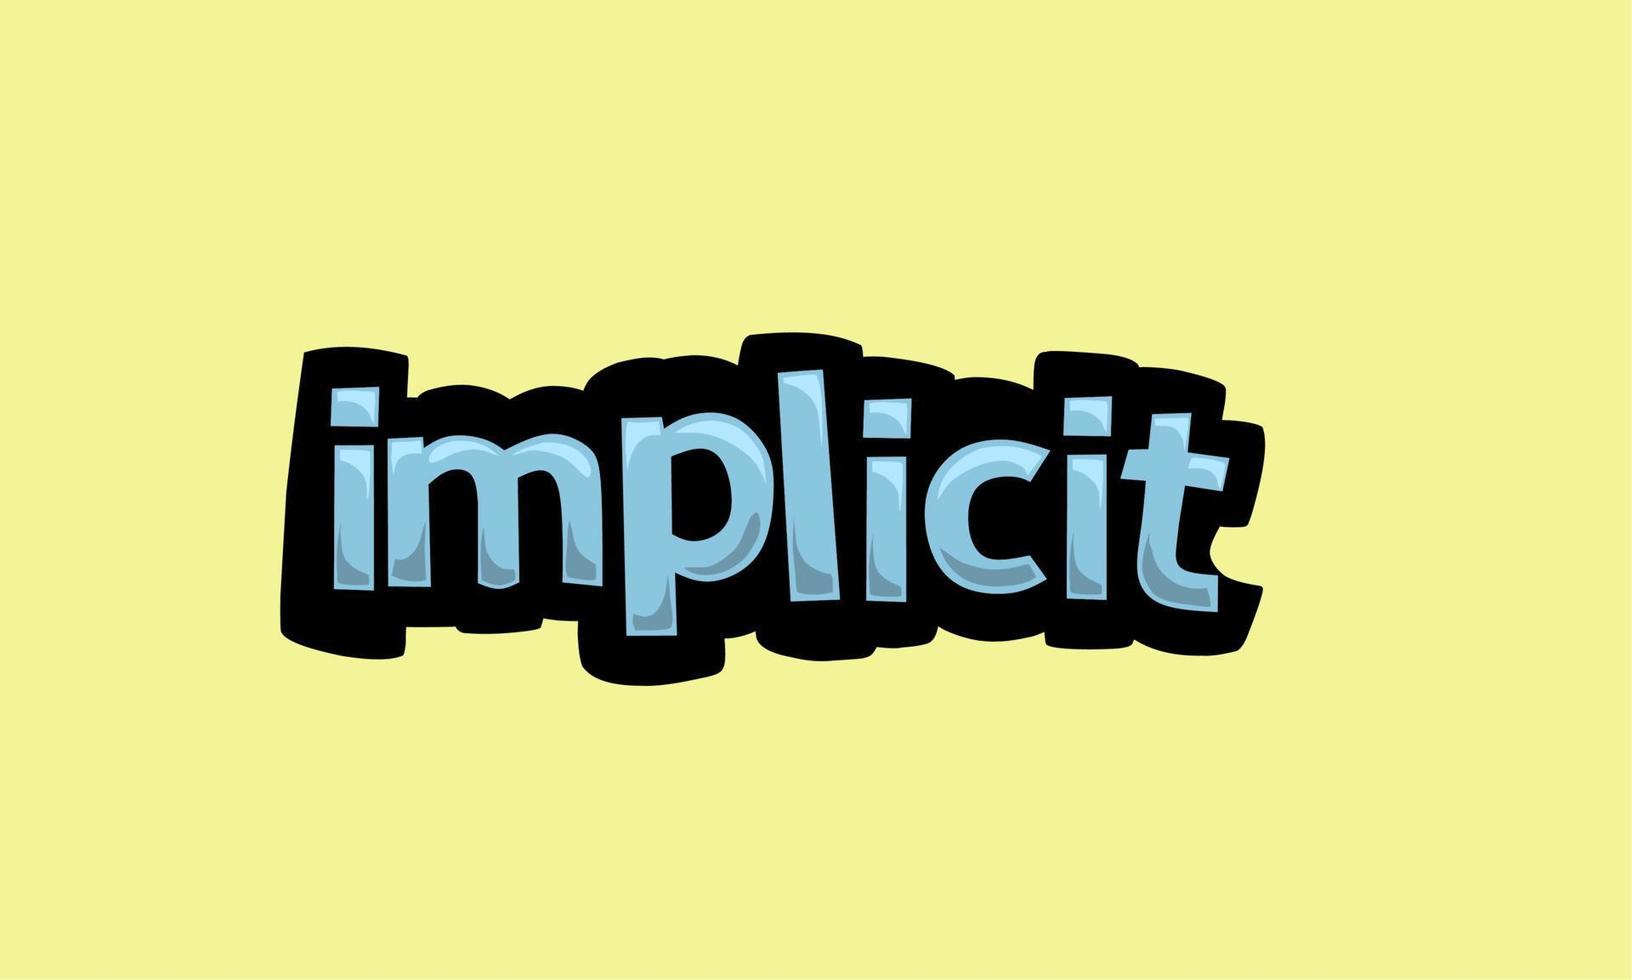 IMPLICIT writing vector design on a yellow background